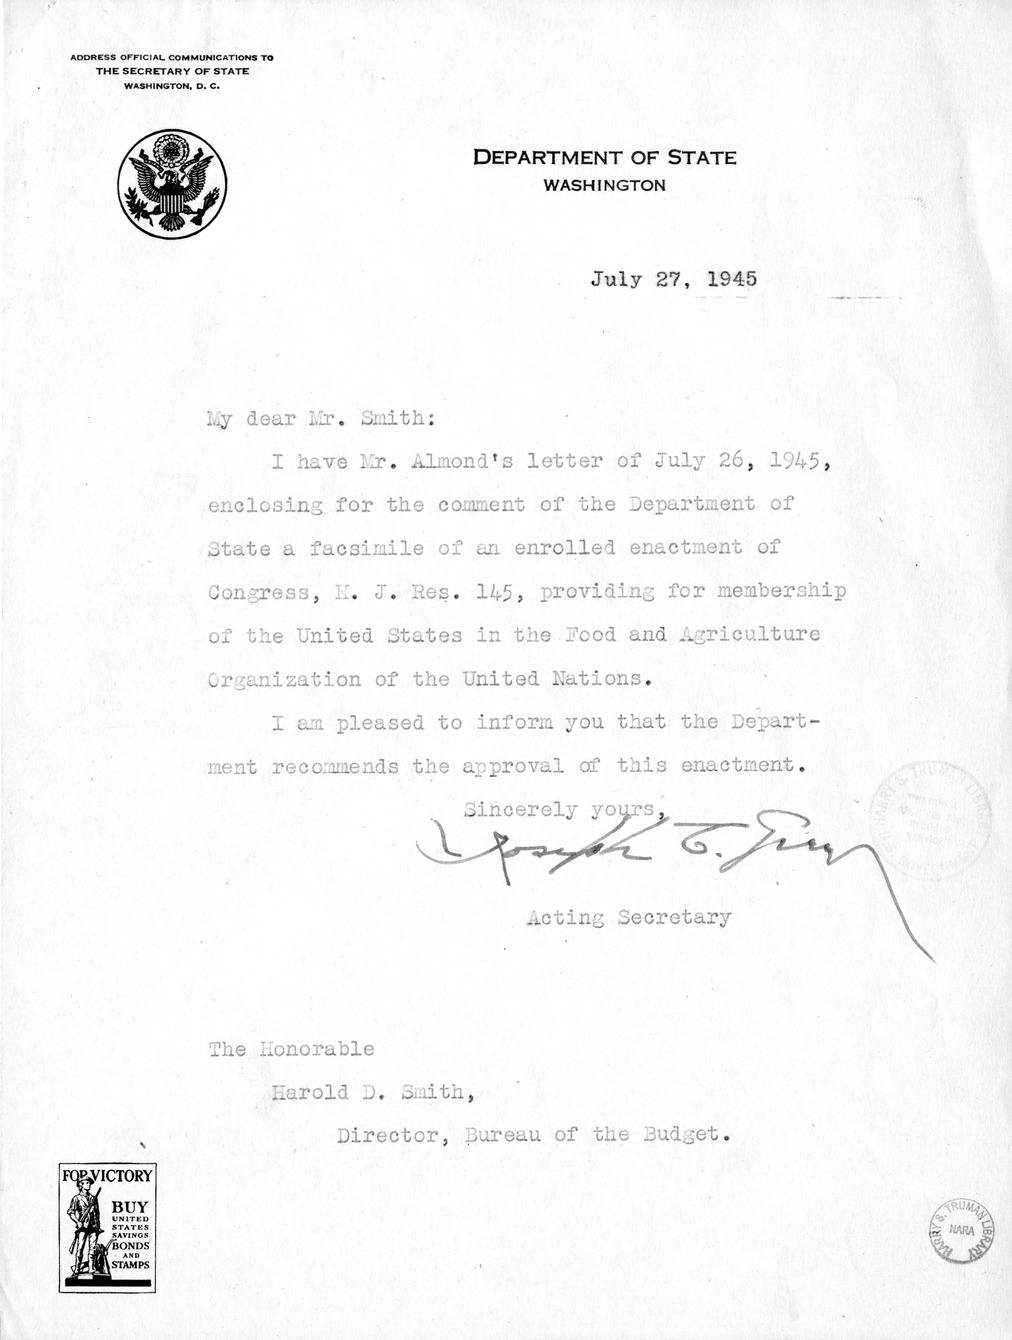 Memorandum from Harold D. Smith to M. C. Latta, H.J.Res. 145, Providing for Membership of the United States in the Food and Agriculture Organization of the United Nations, with Attachments